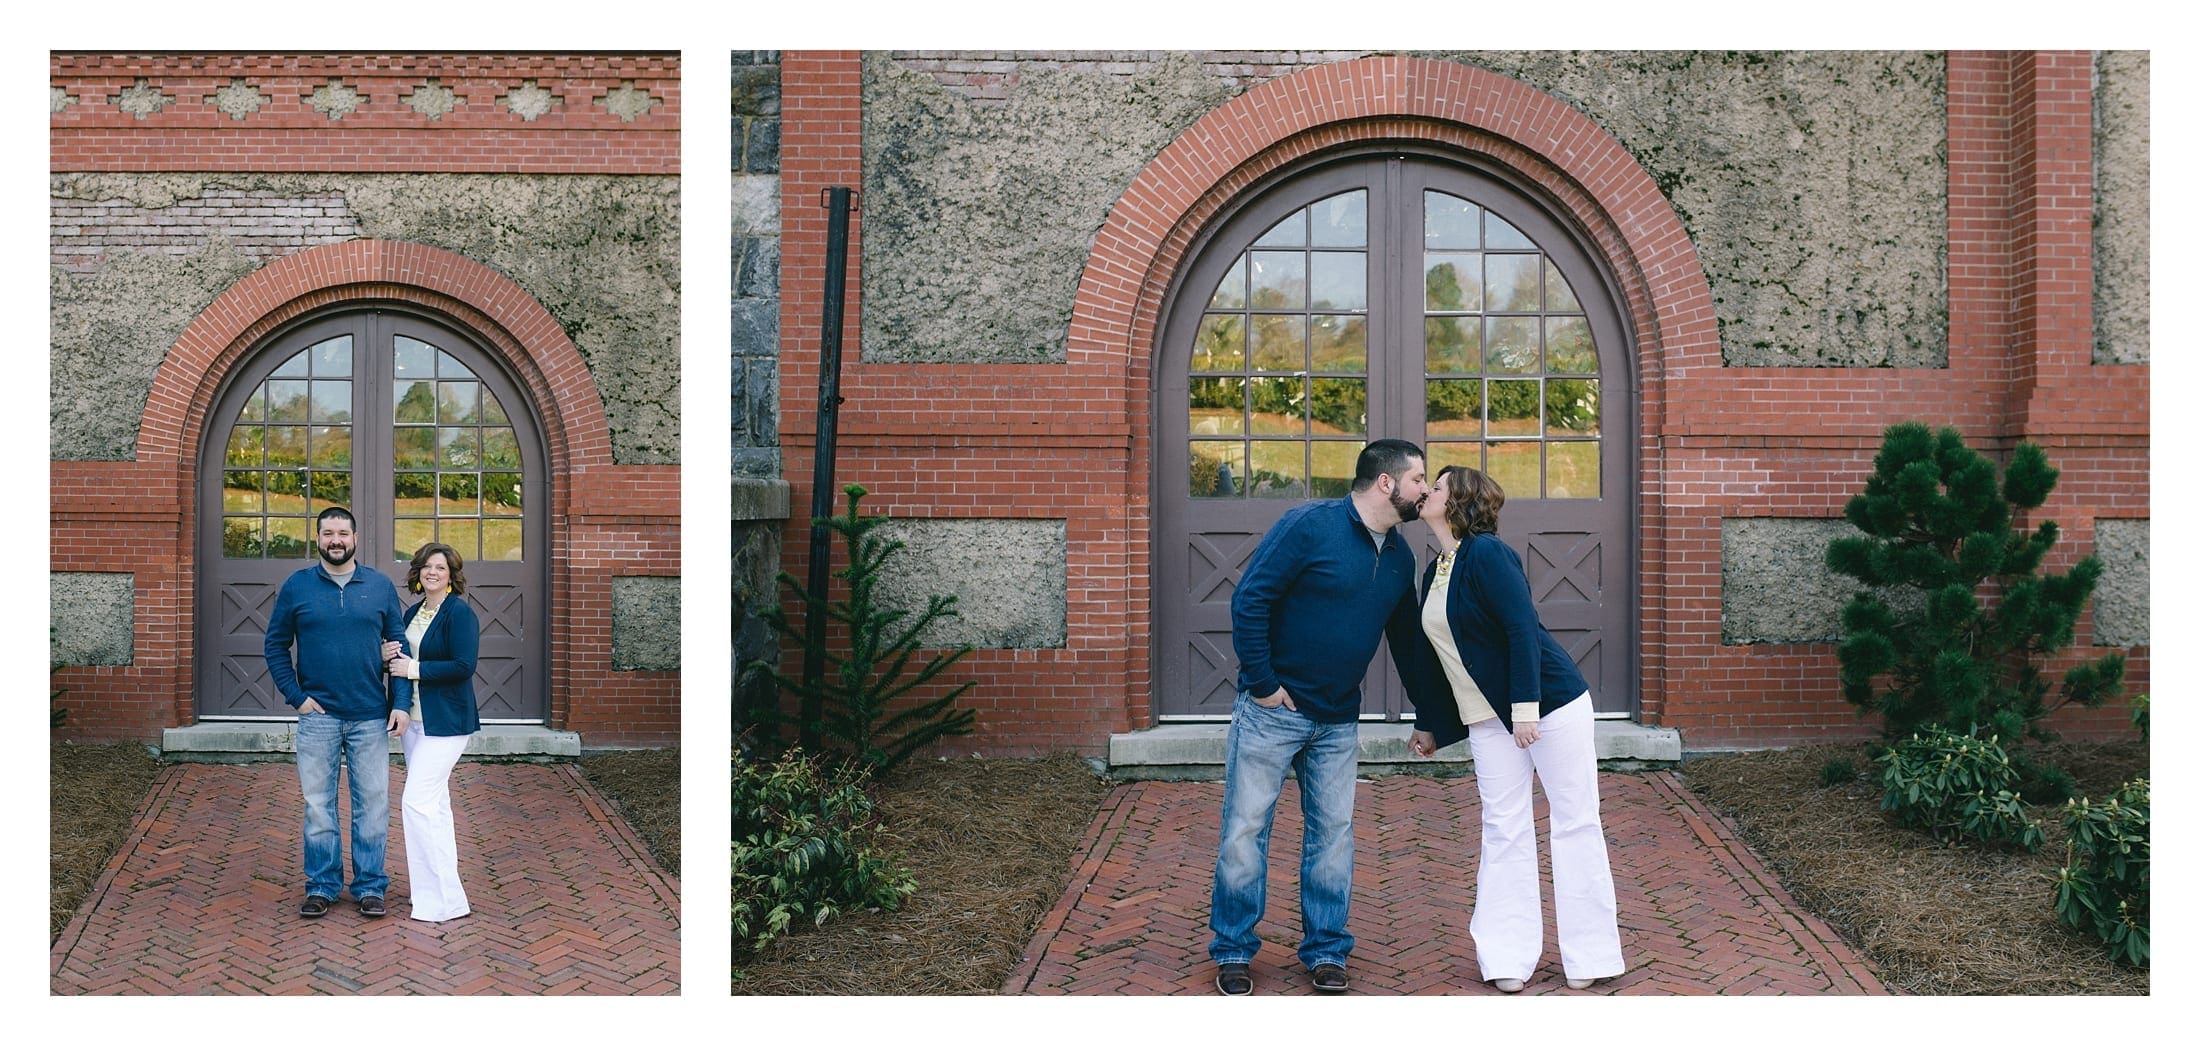 Biltmore engagement pictures at the gardens beside the Biltmore House in Asheville, NC